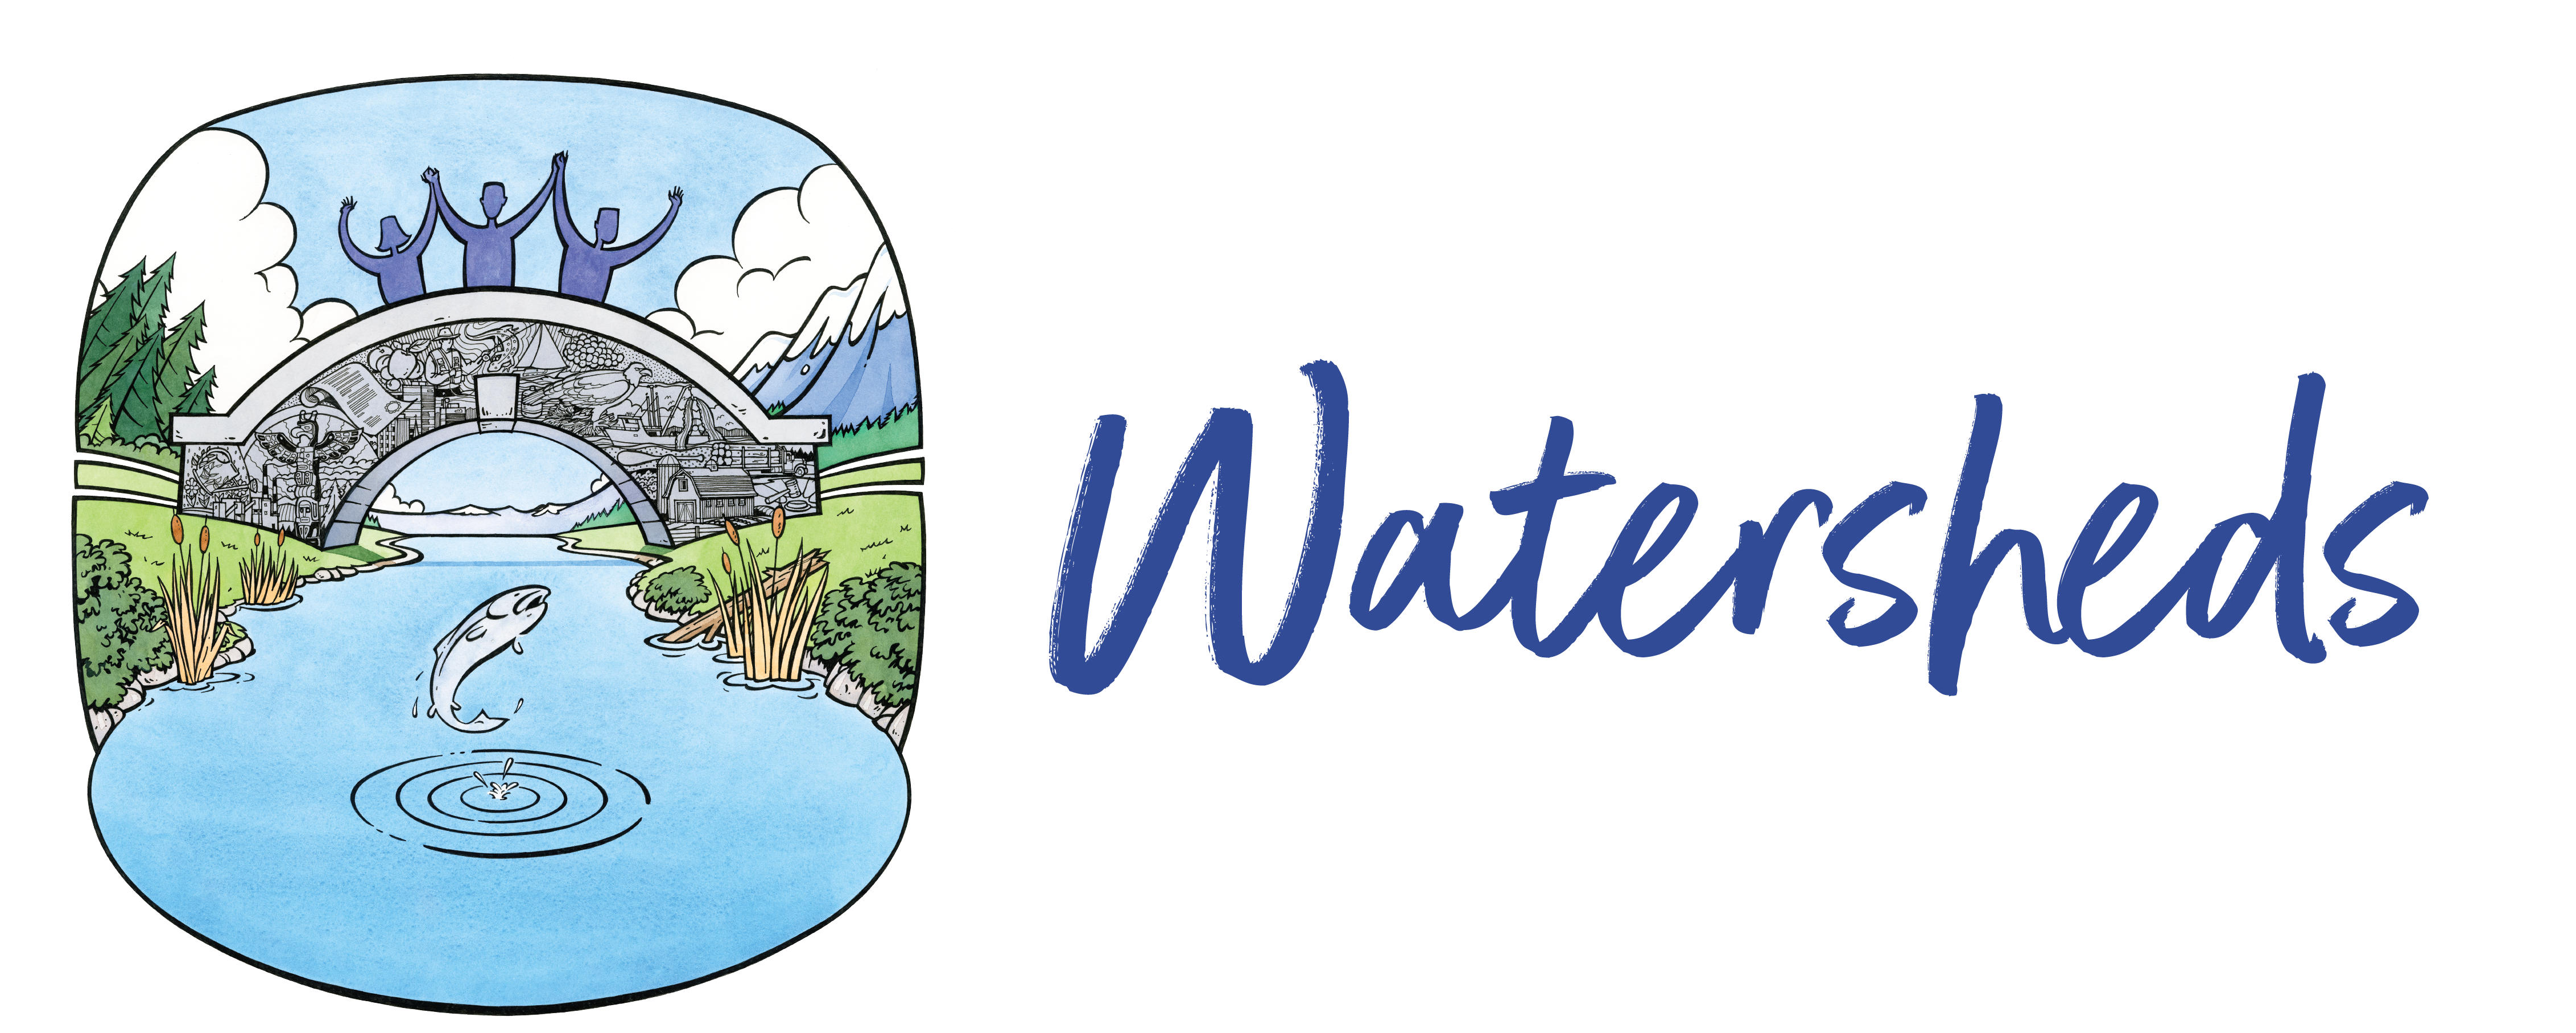 Watersheds - Growing a watershed movement